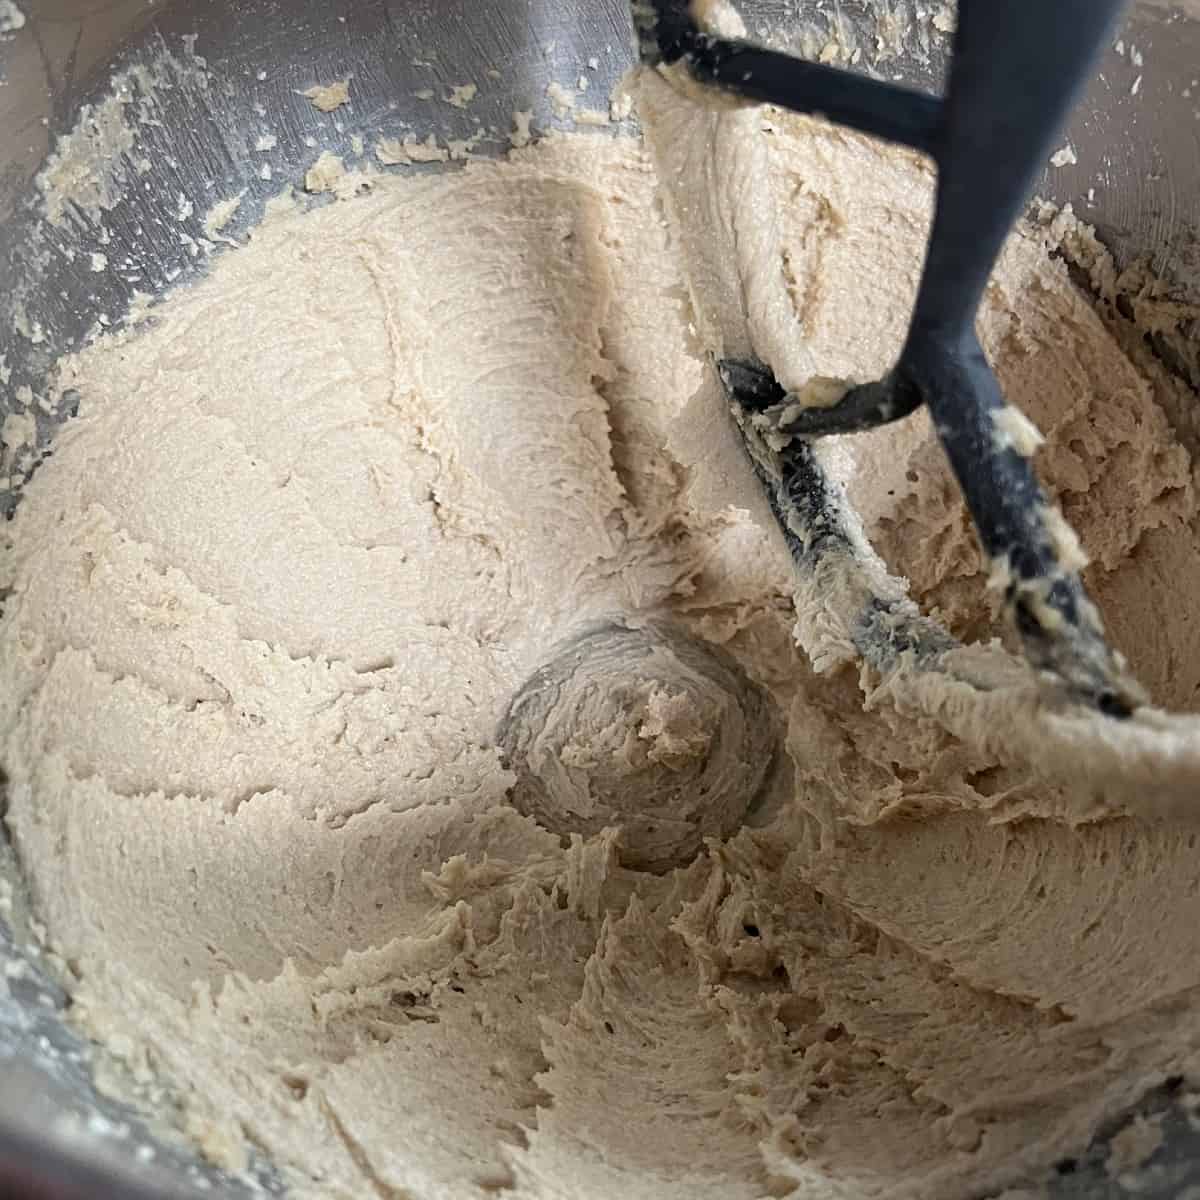 Mix sugar and butter gingerbread dough until smooth.